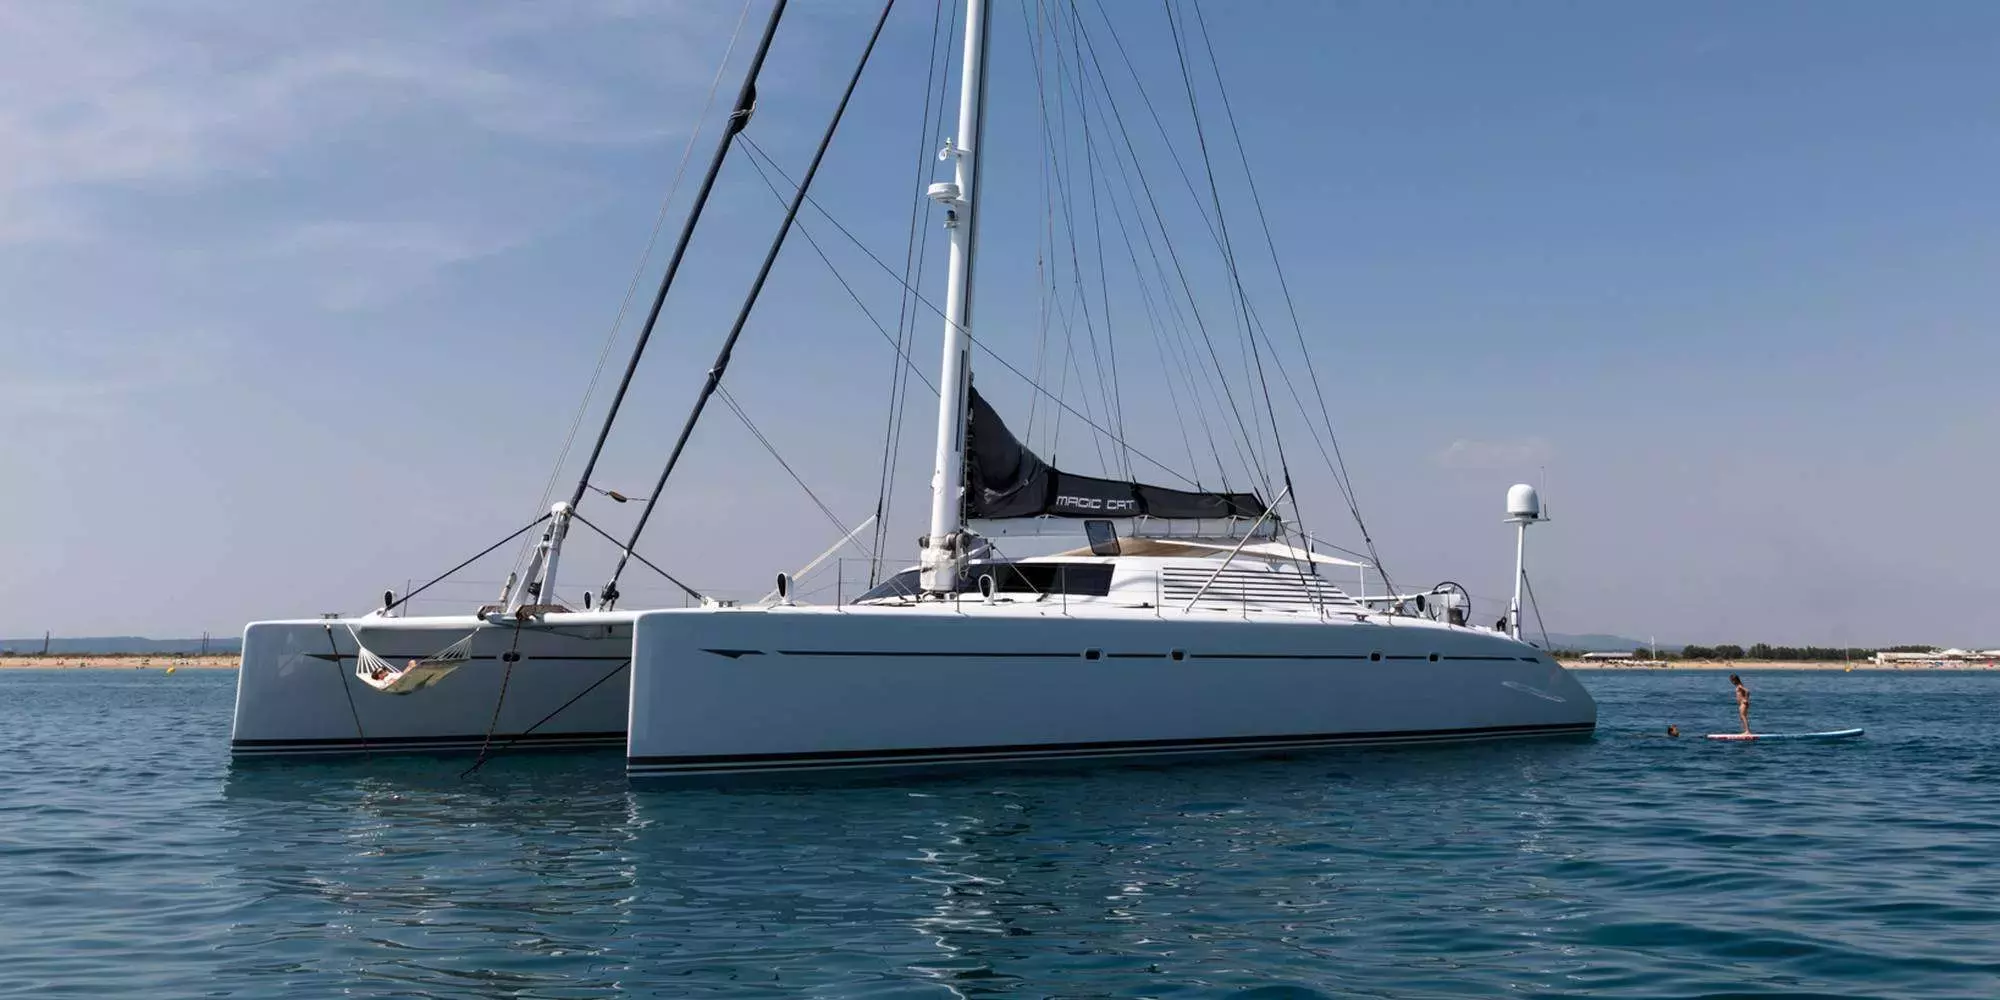 Magic Cat by Multiplast - Top rates for a Charter of a private Luxury Catamaran in Guadeloupe